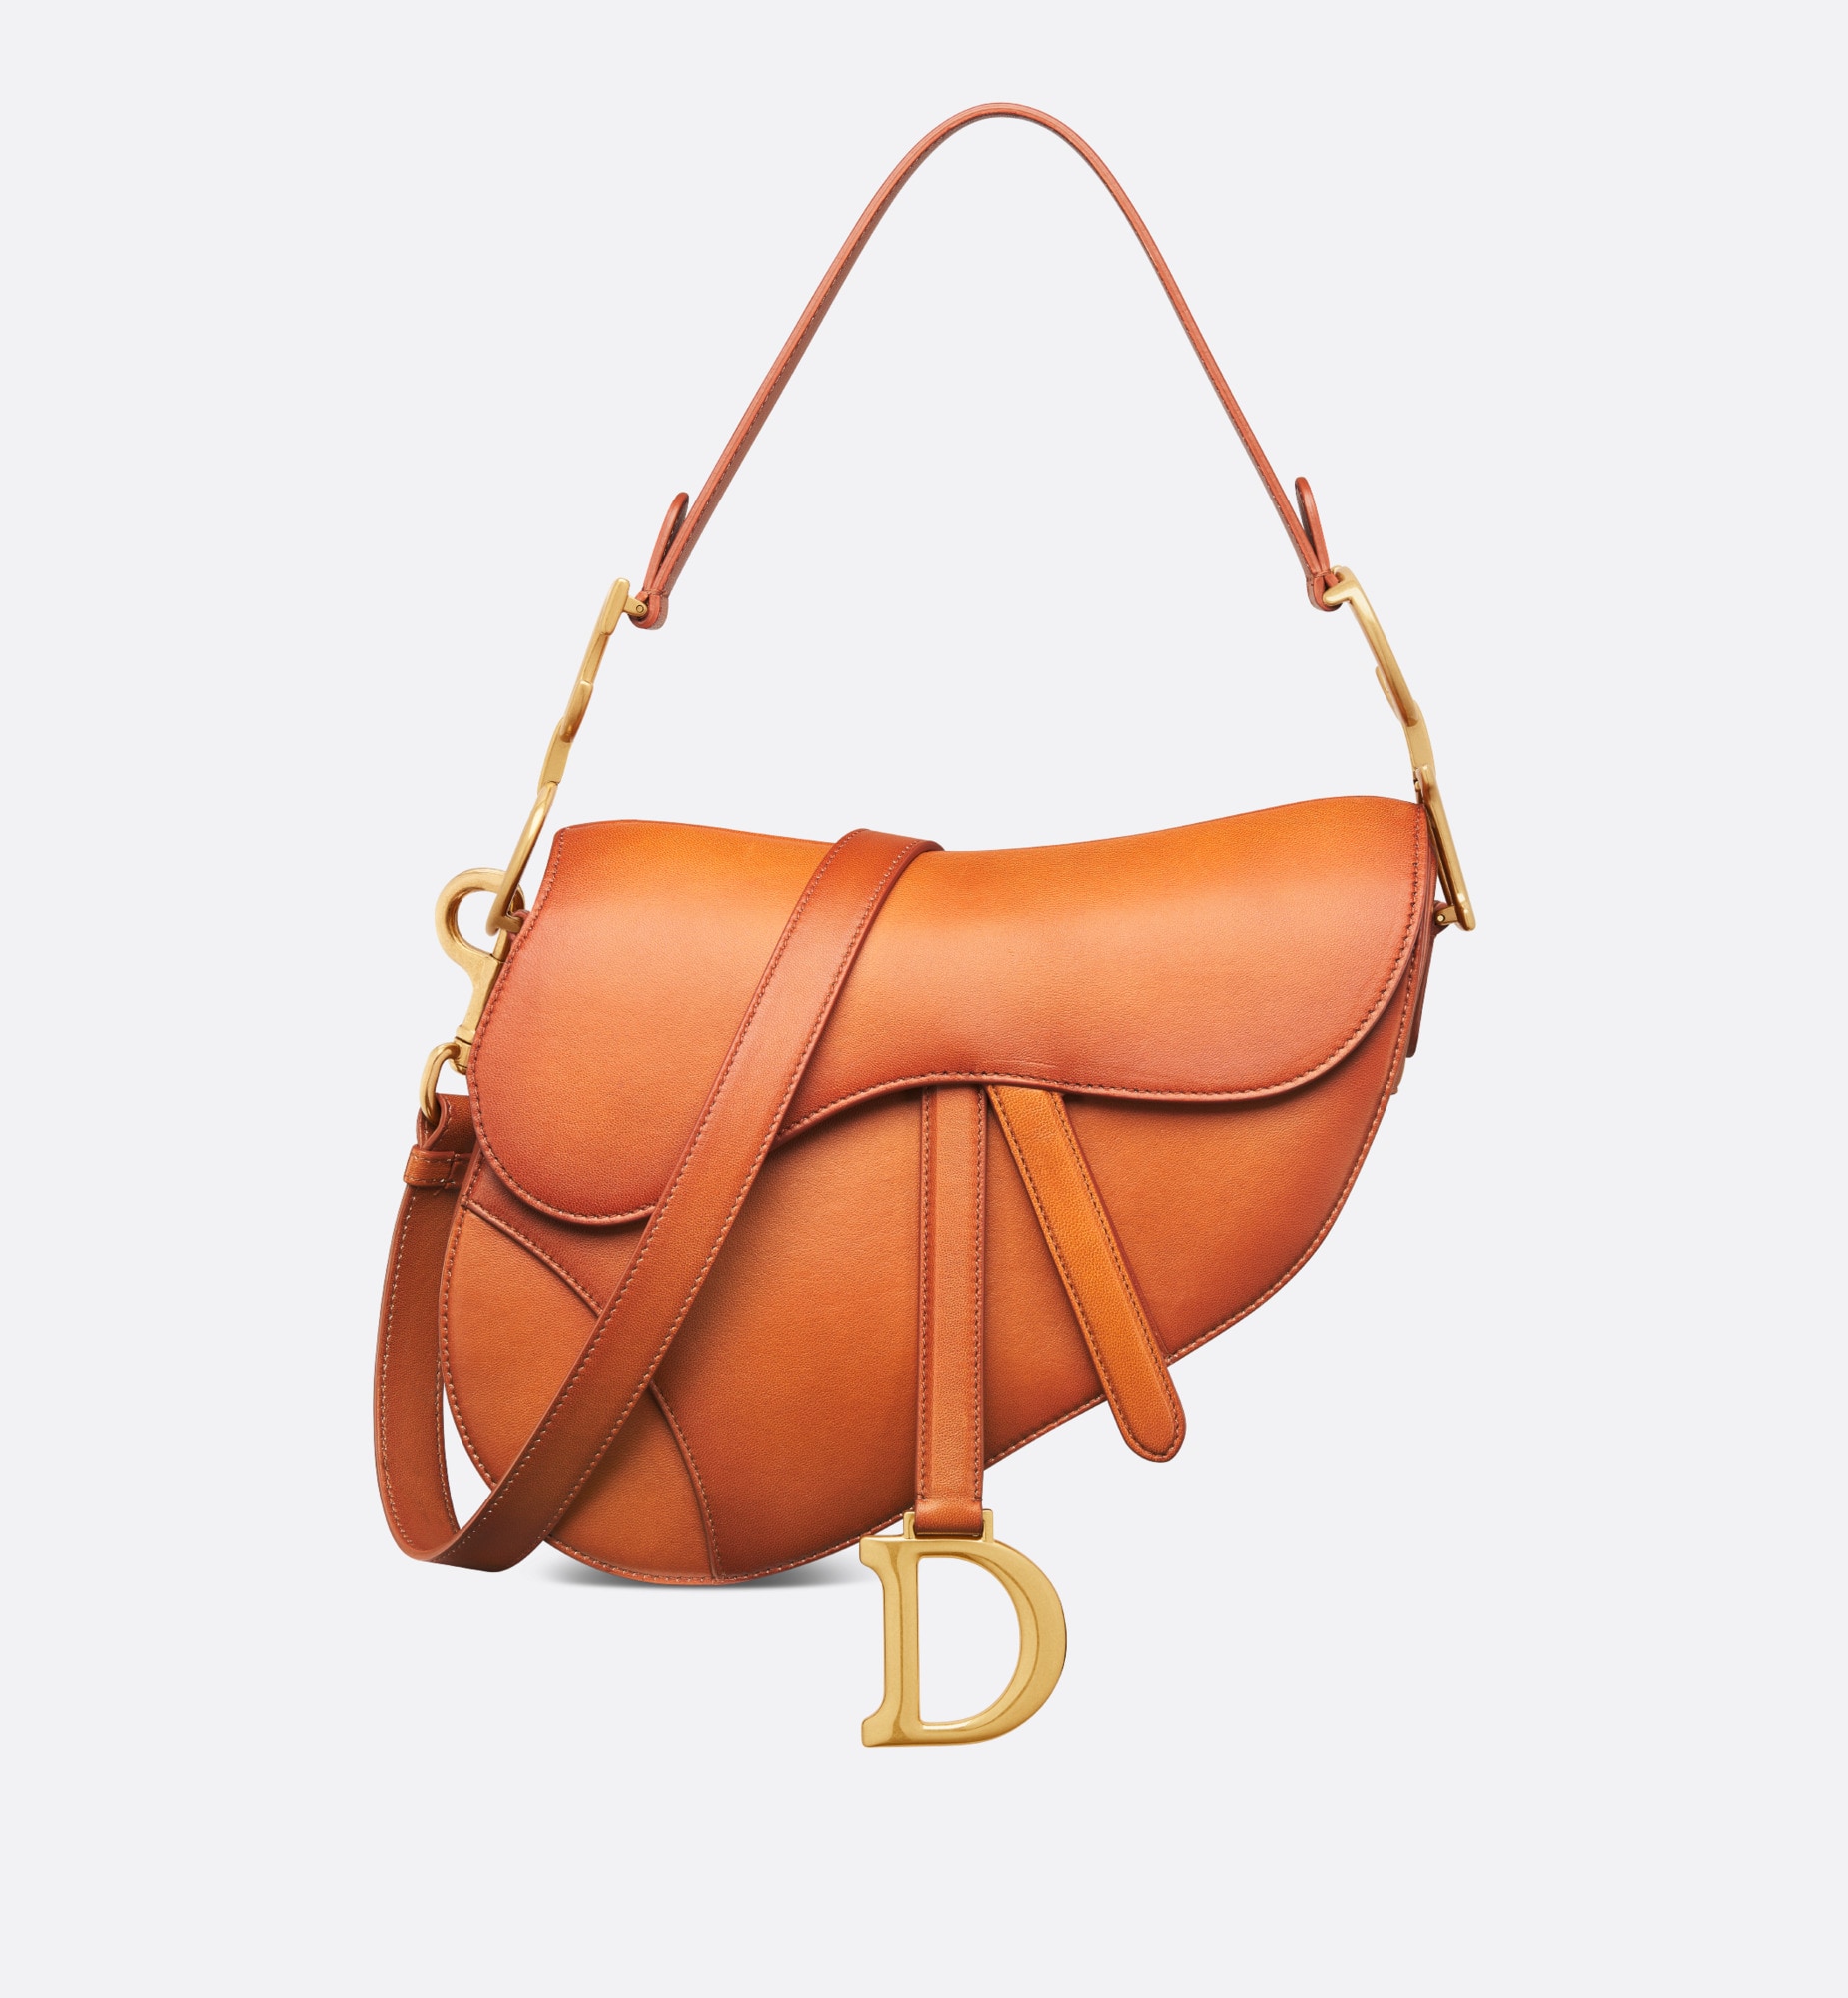 Dior saddle bag with strap brown lambskin with a patina finish